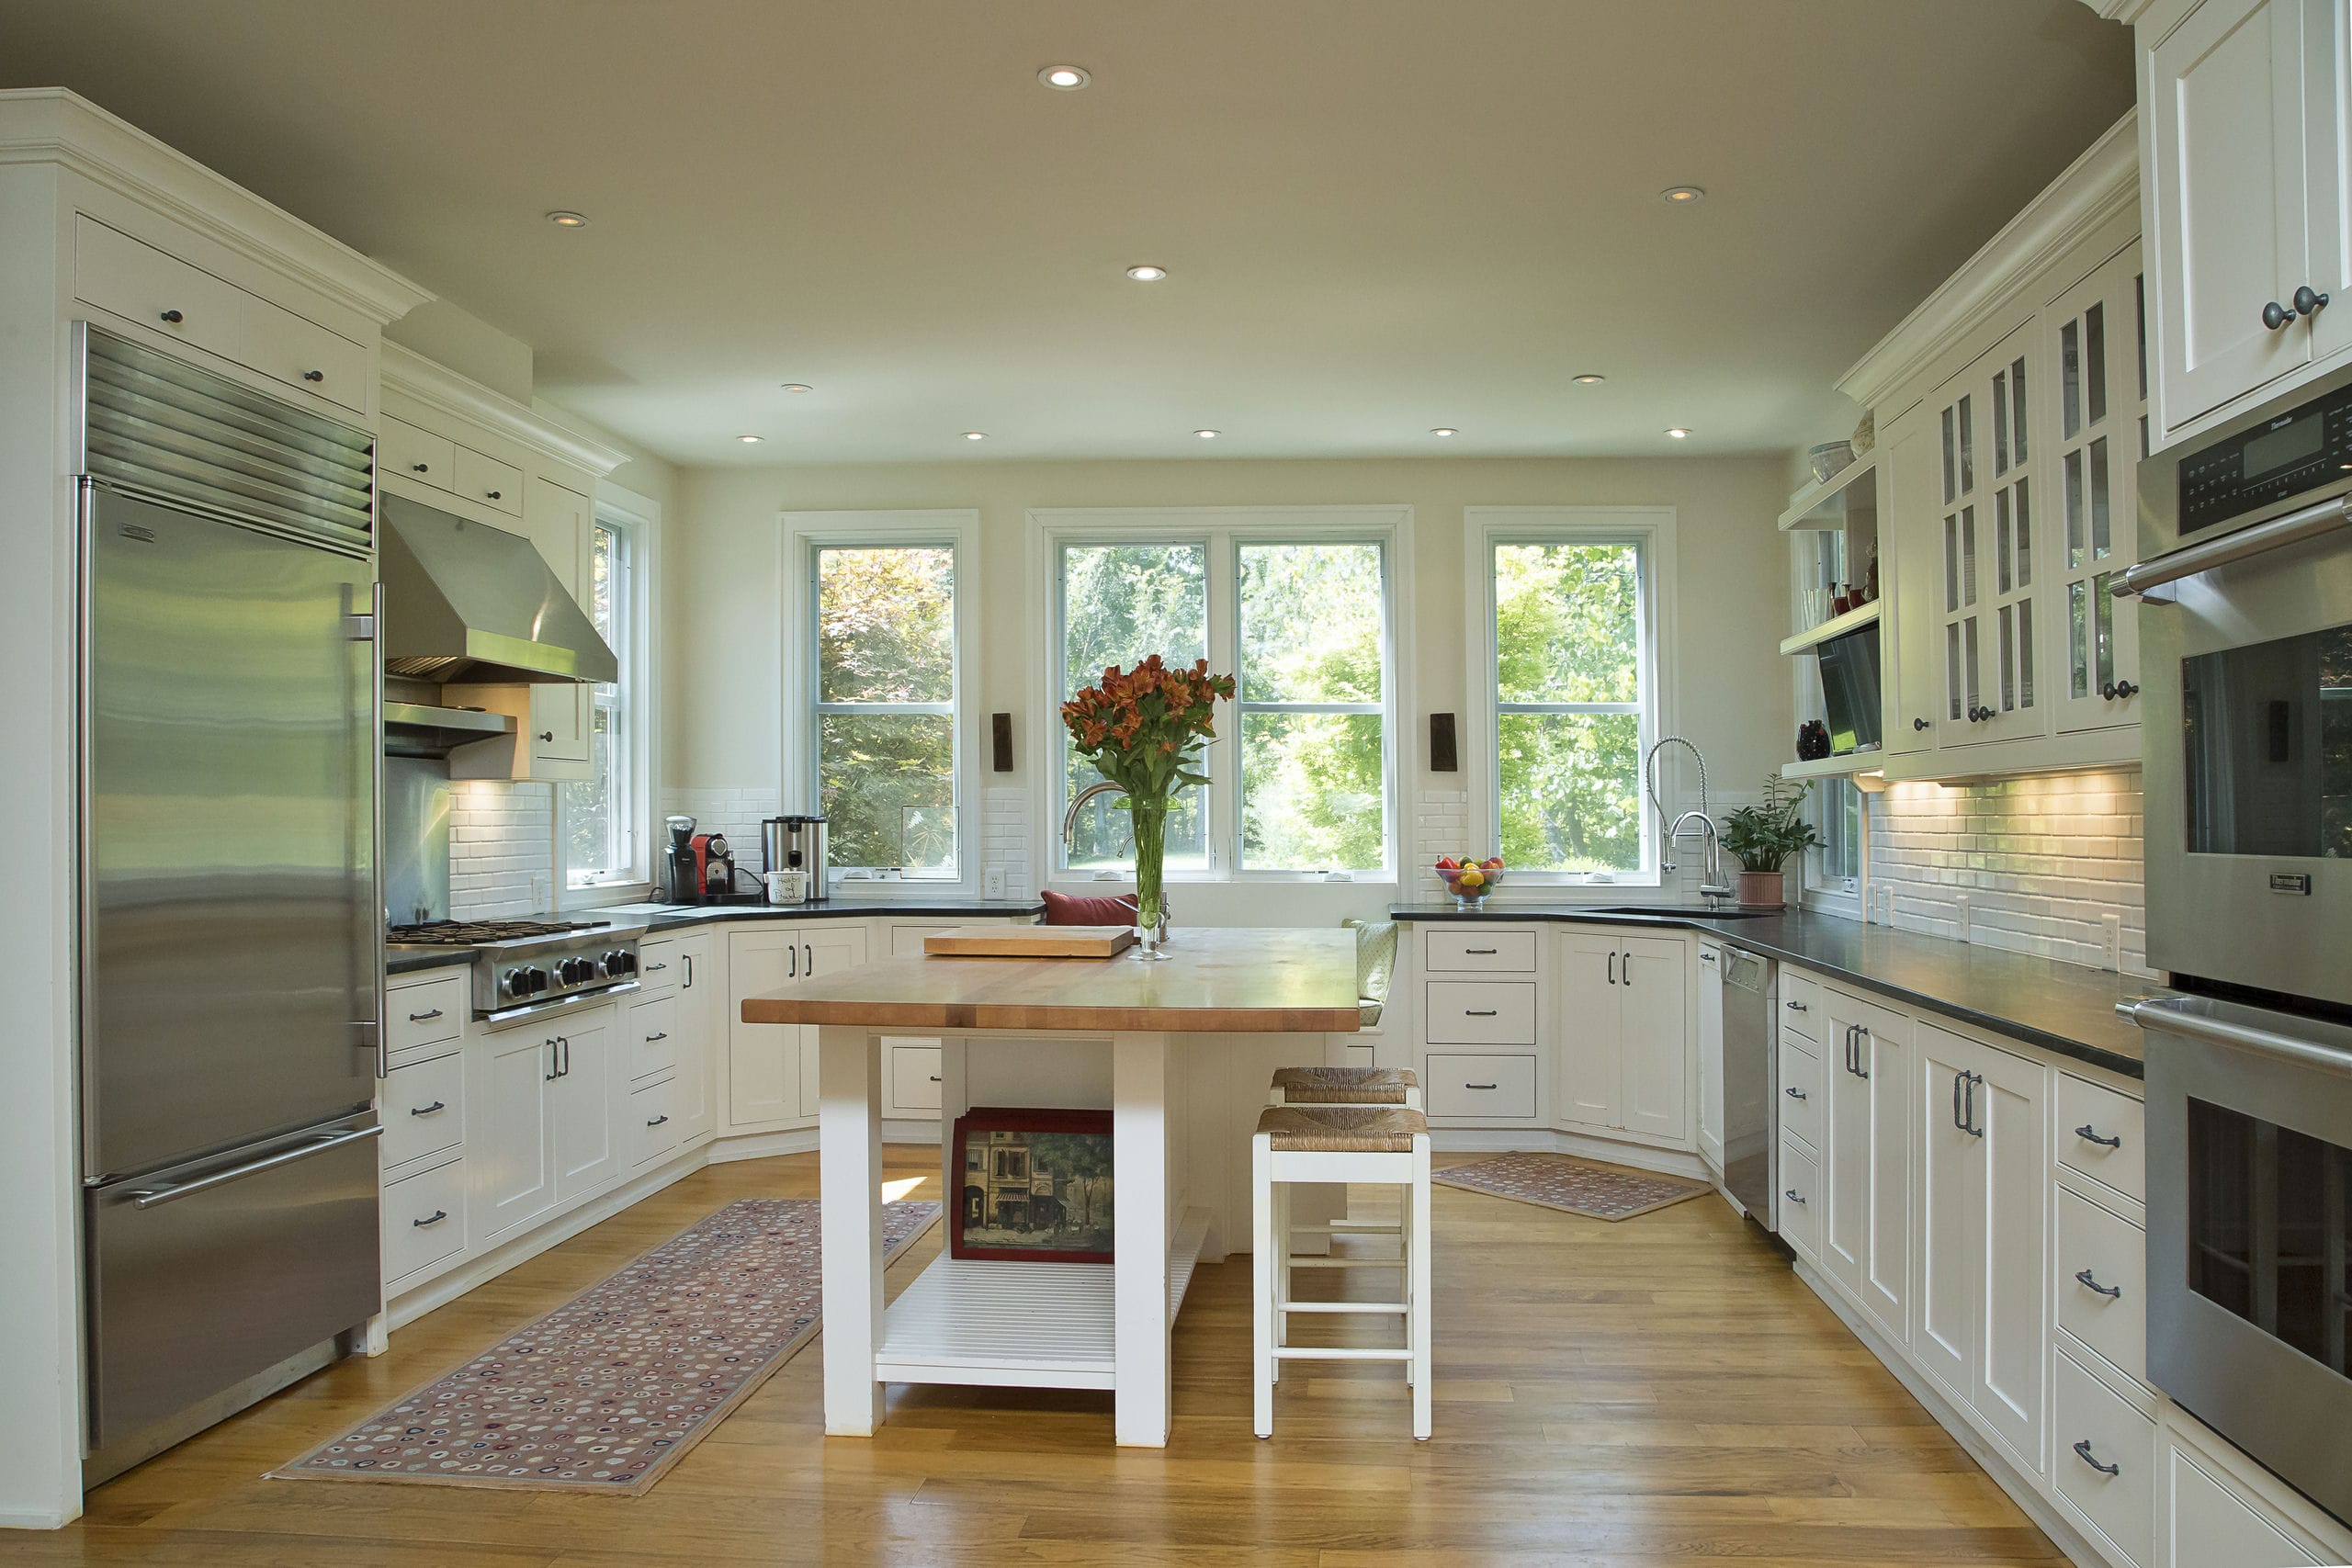 Luxury kitchen with inset cabinets and large butcher block island